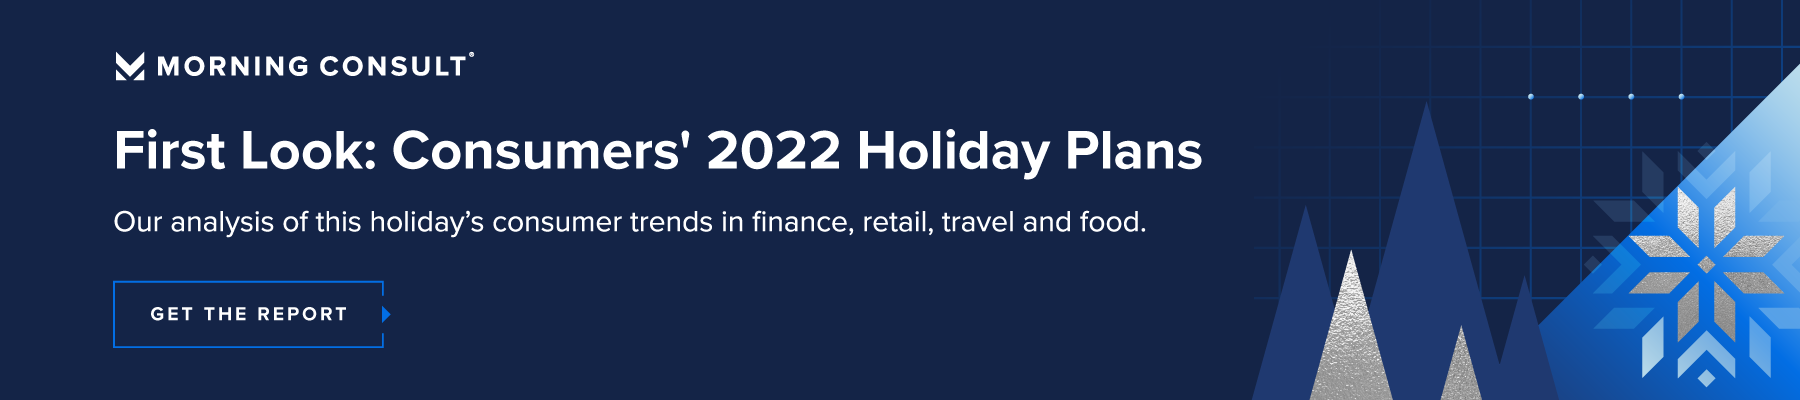 First Look: Consumers' 2022 Holiday Plans